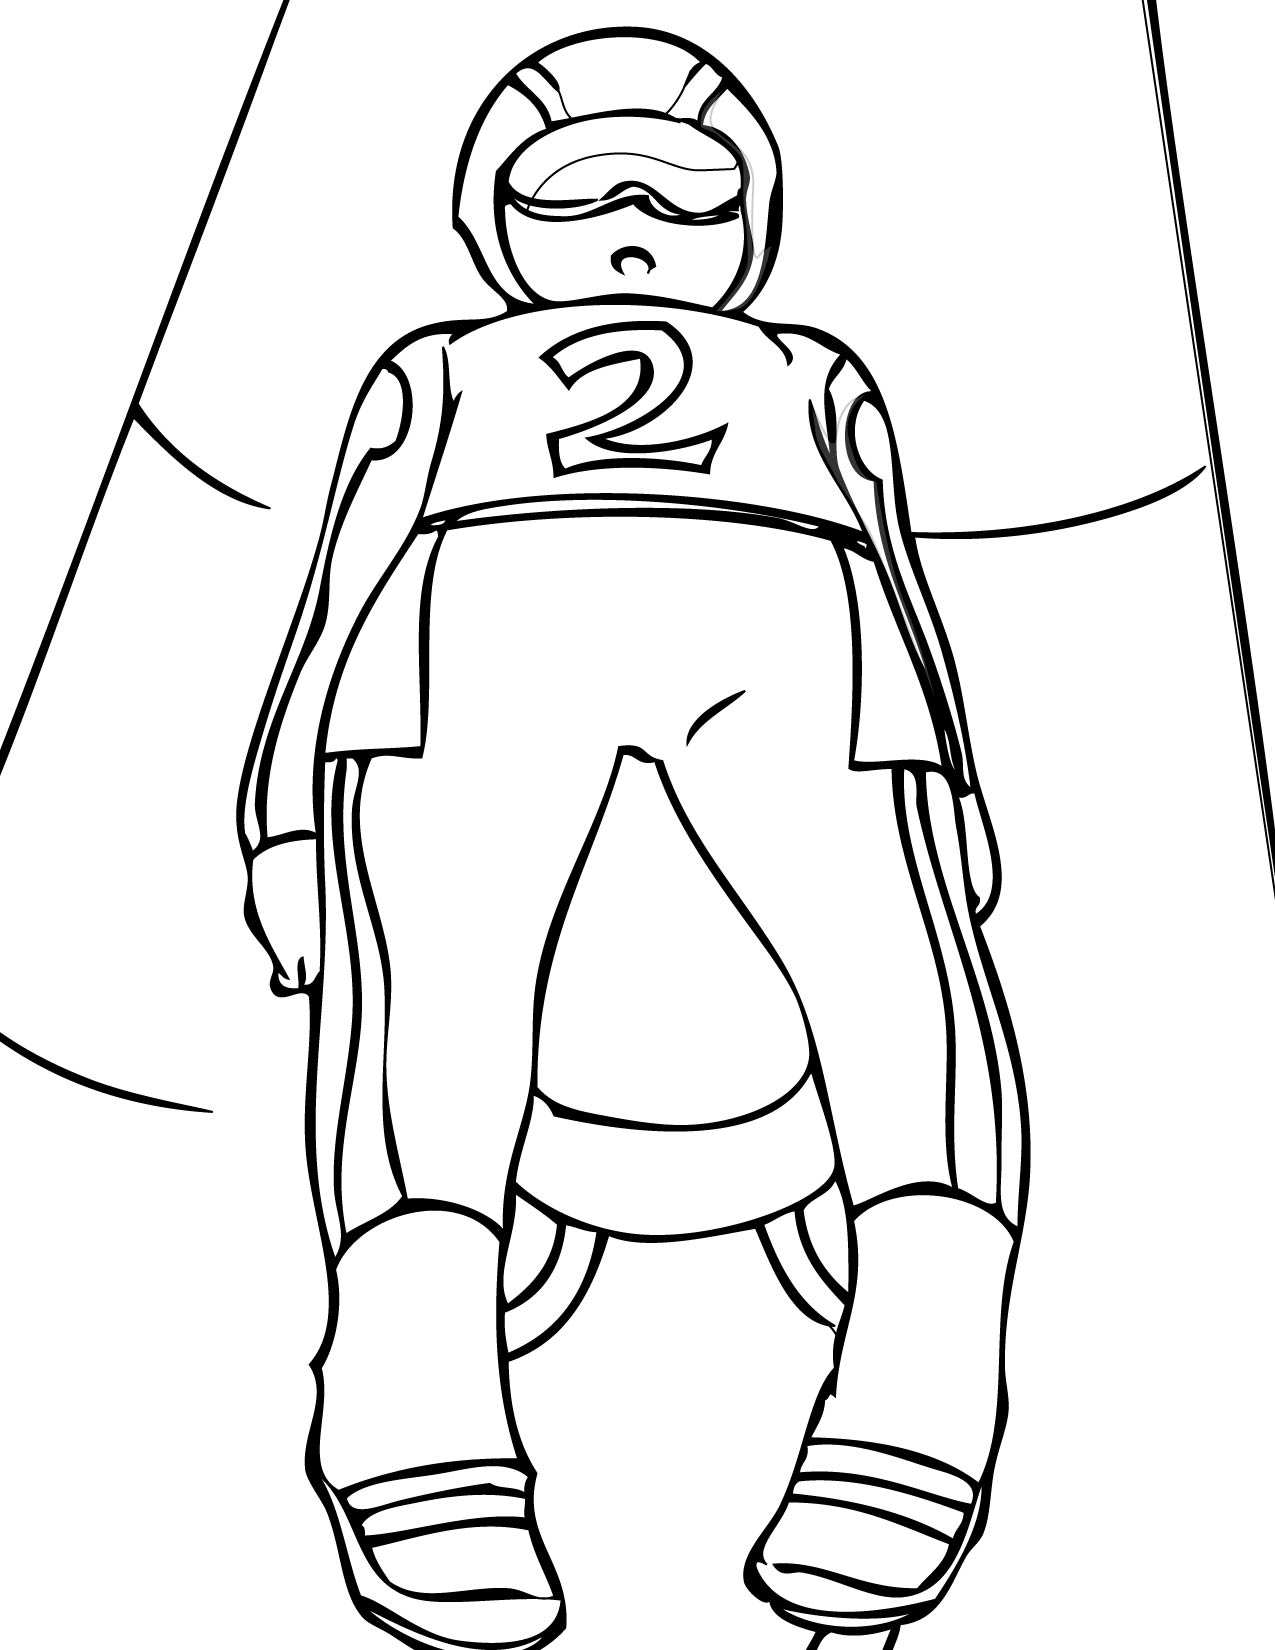 Sled coloring page